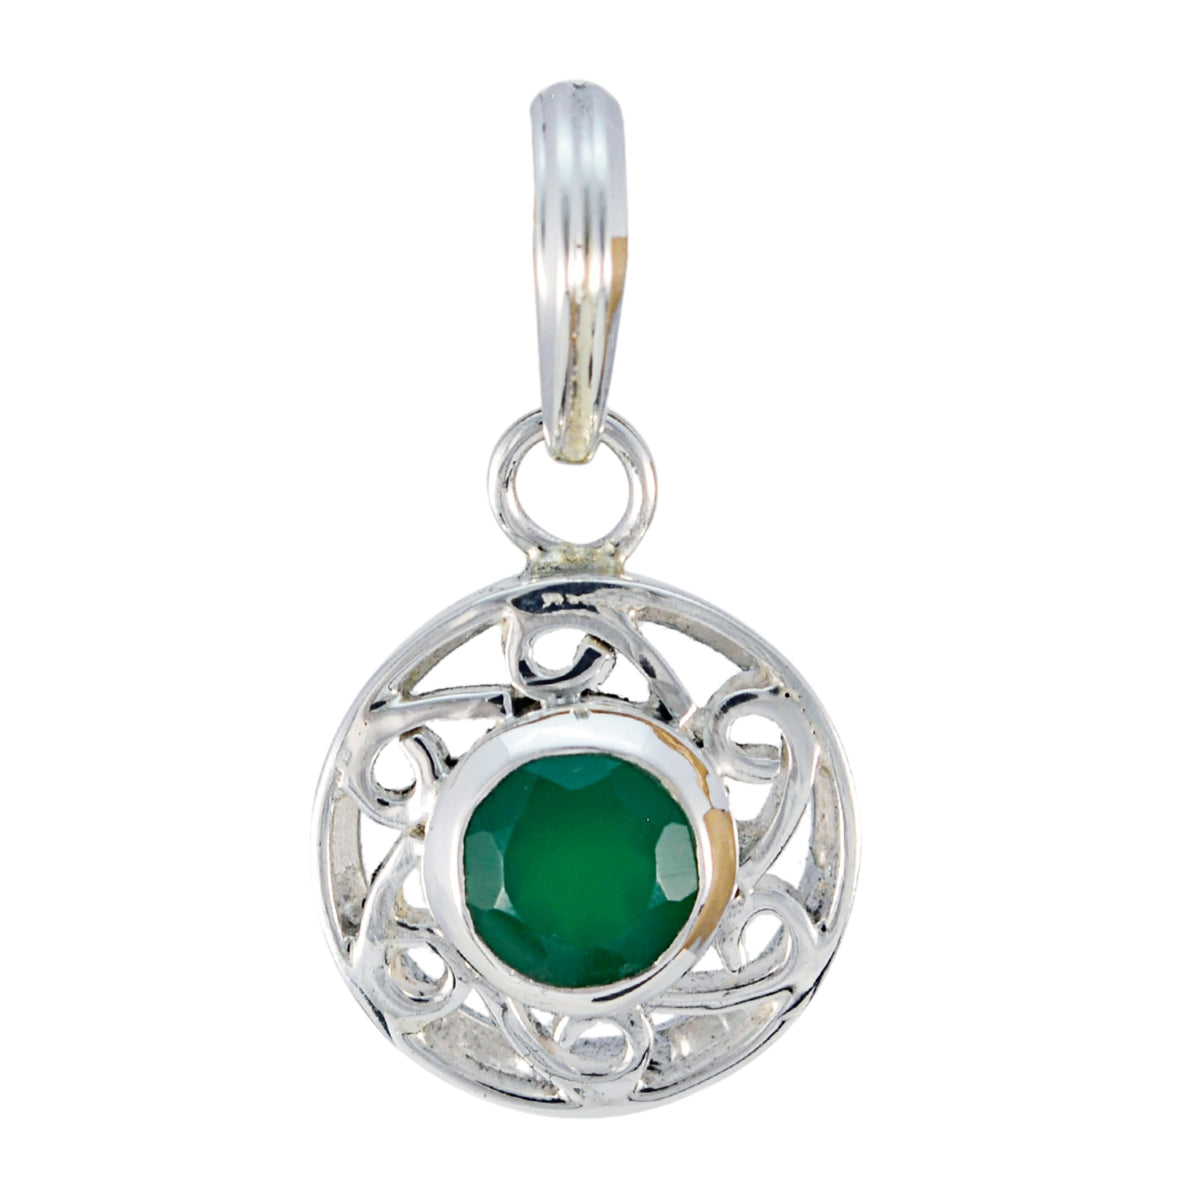 Riyo Real Gemstones Round Faceted Green Green Onyx Solid Silver Pendants mother gift